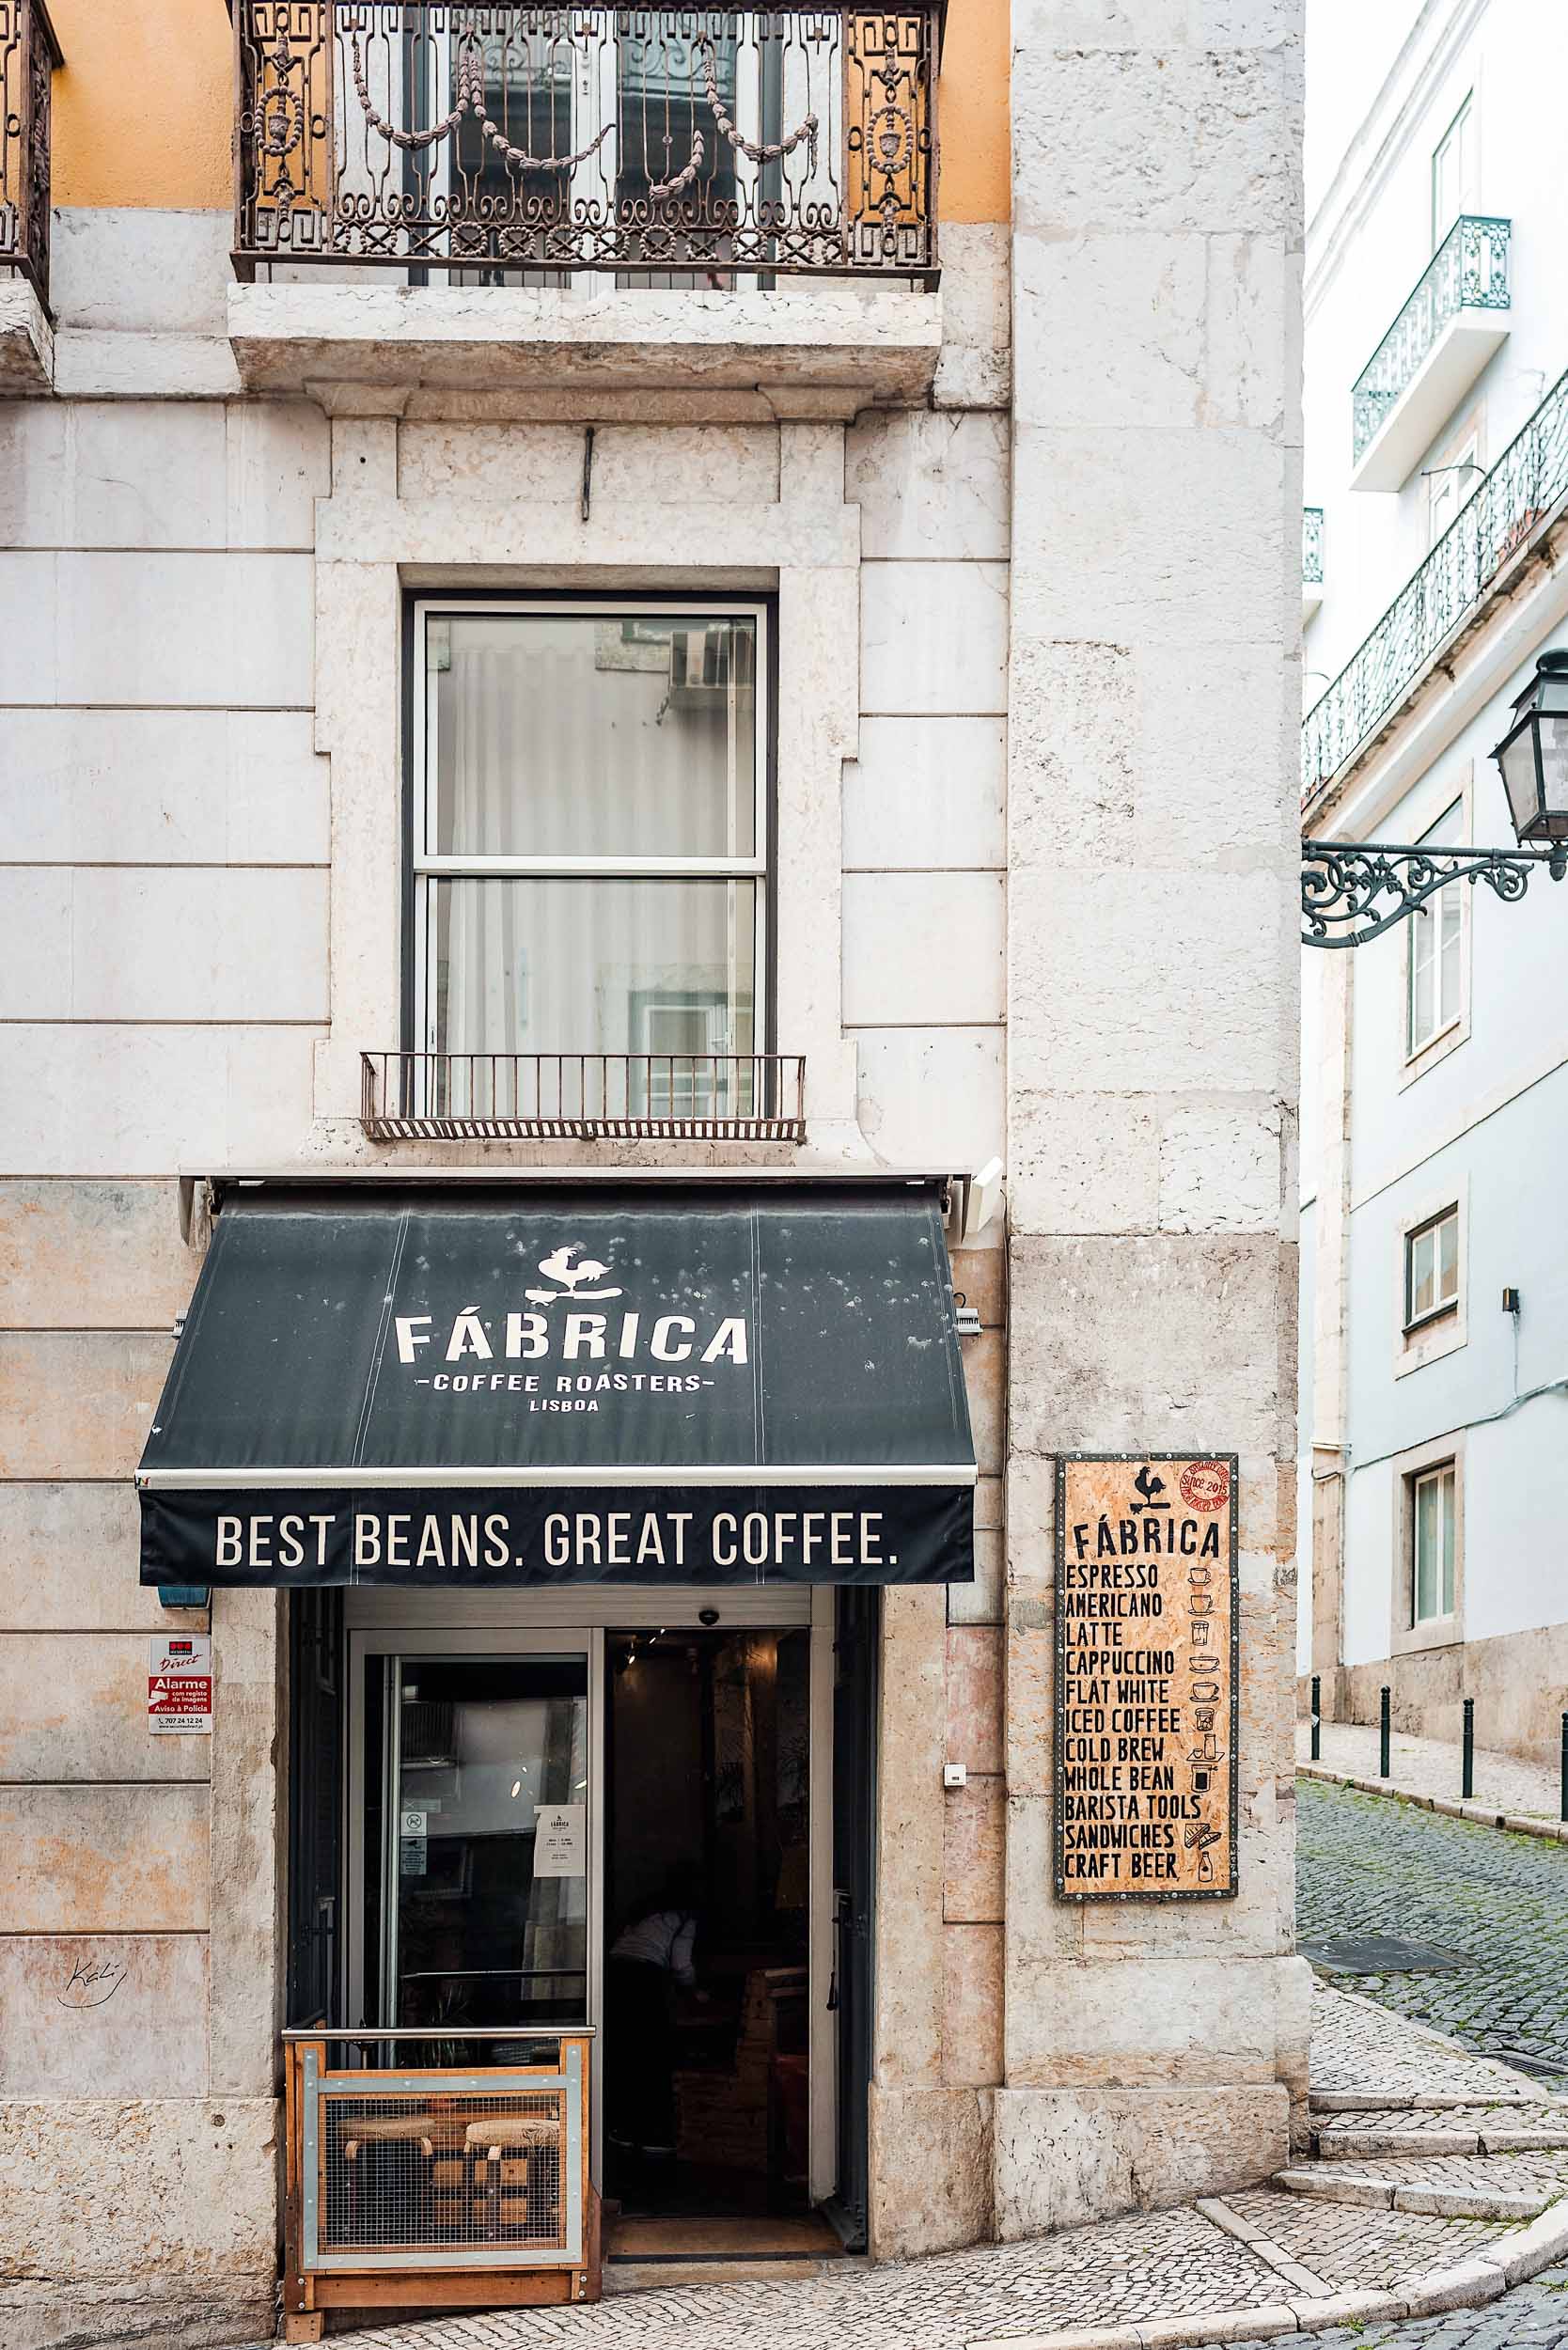 Fabrica Coffee Roasters is a coffee shop located on one of my favorite streets in Lisbon, Rua das Flores!